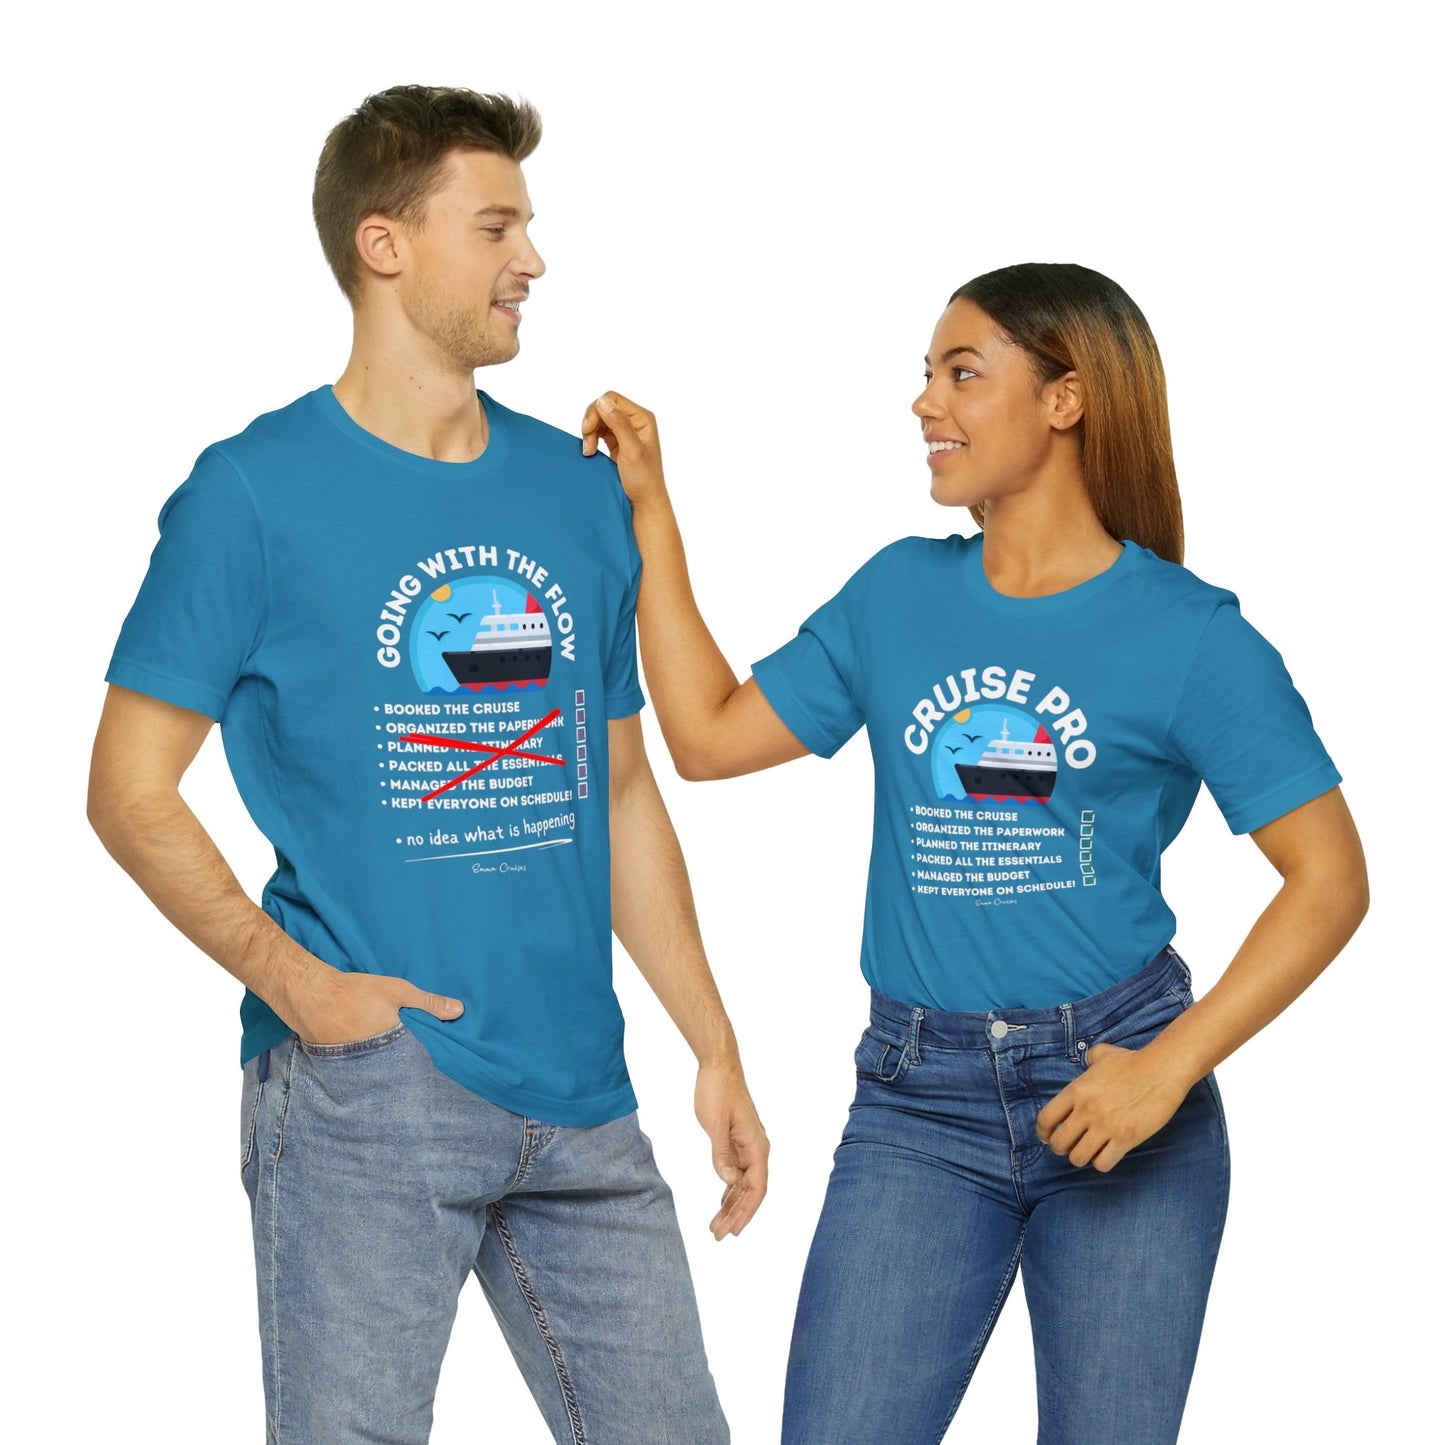 Cruise Pro/Going With the Flow T-Shirt Bundle (Aqua)